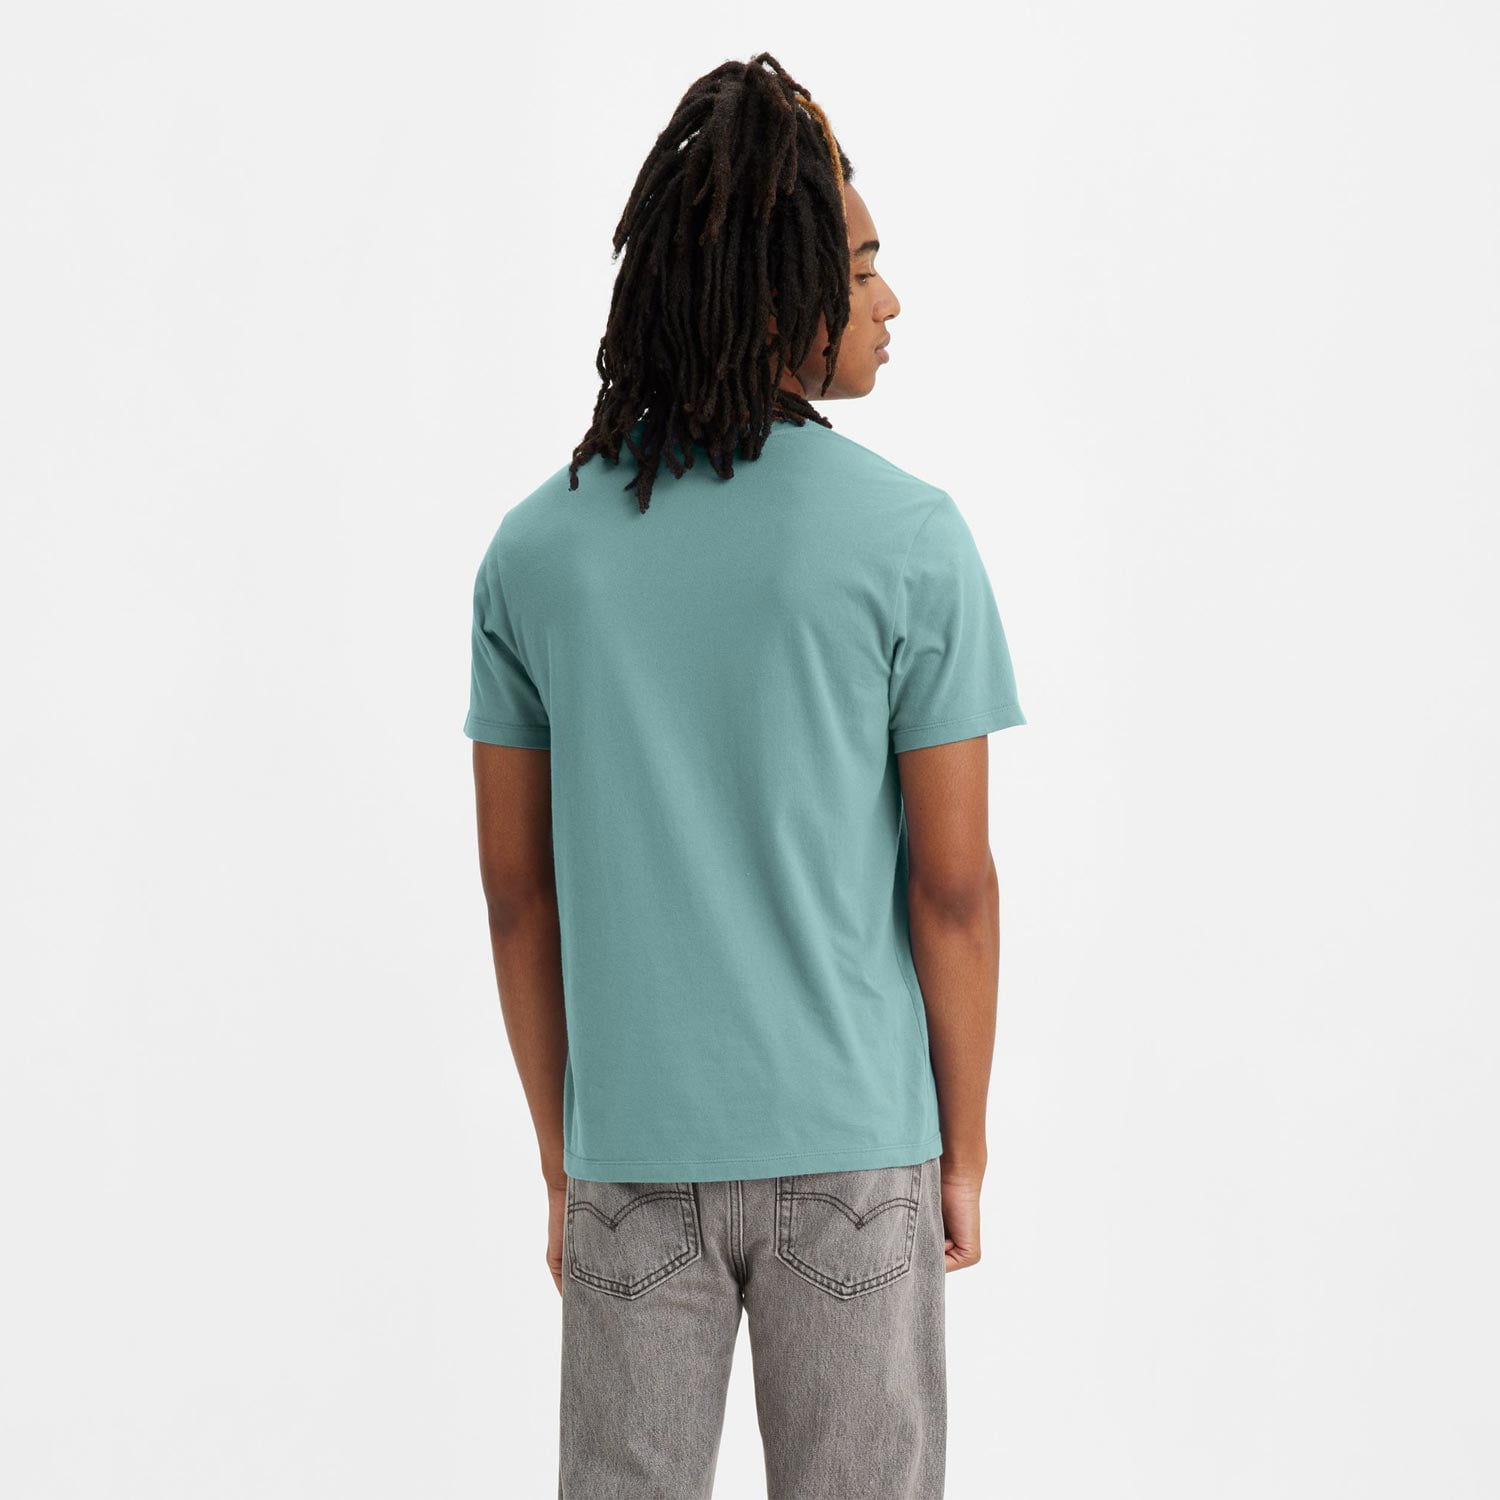 Levis Graphic Crewneck Regular Fit Short Sleeve Tee - Color Extension/Pastel Turquoise